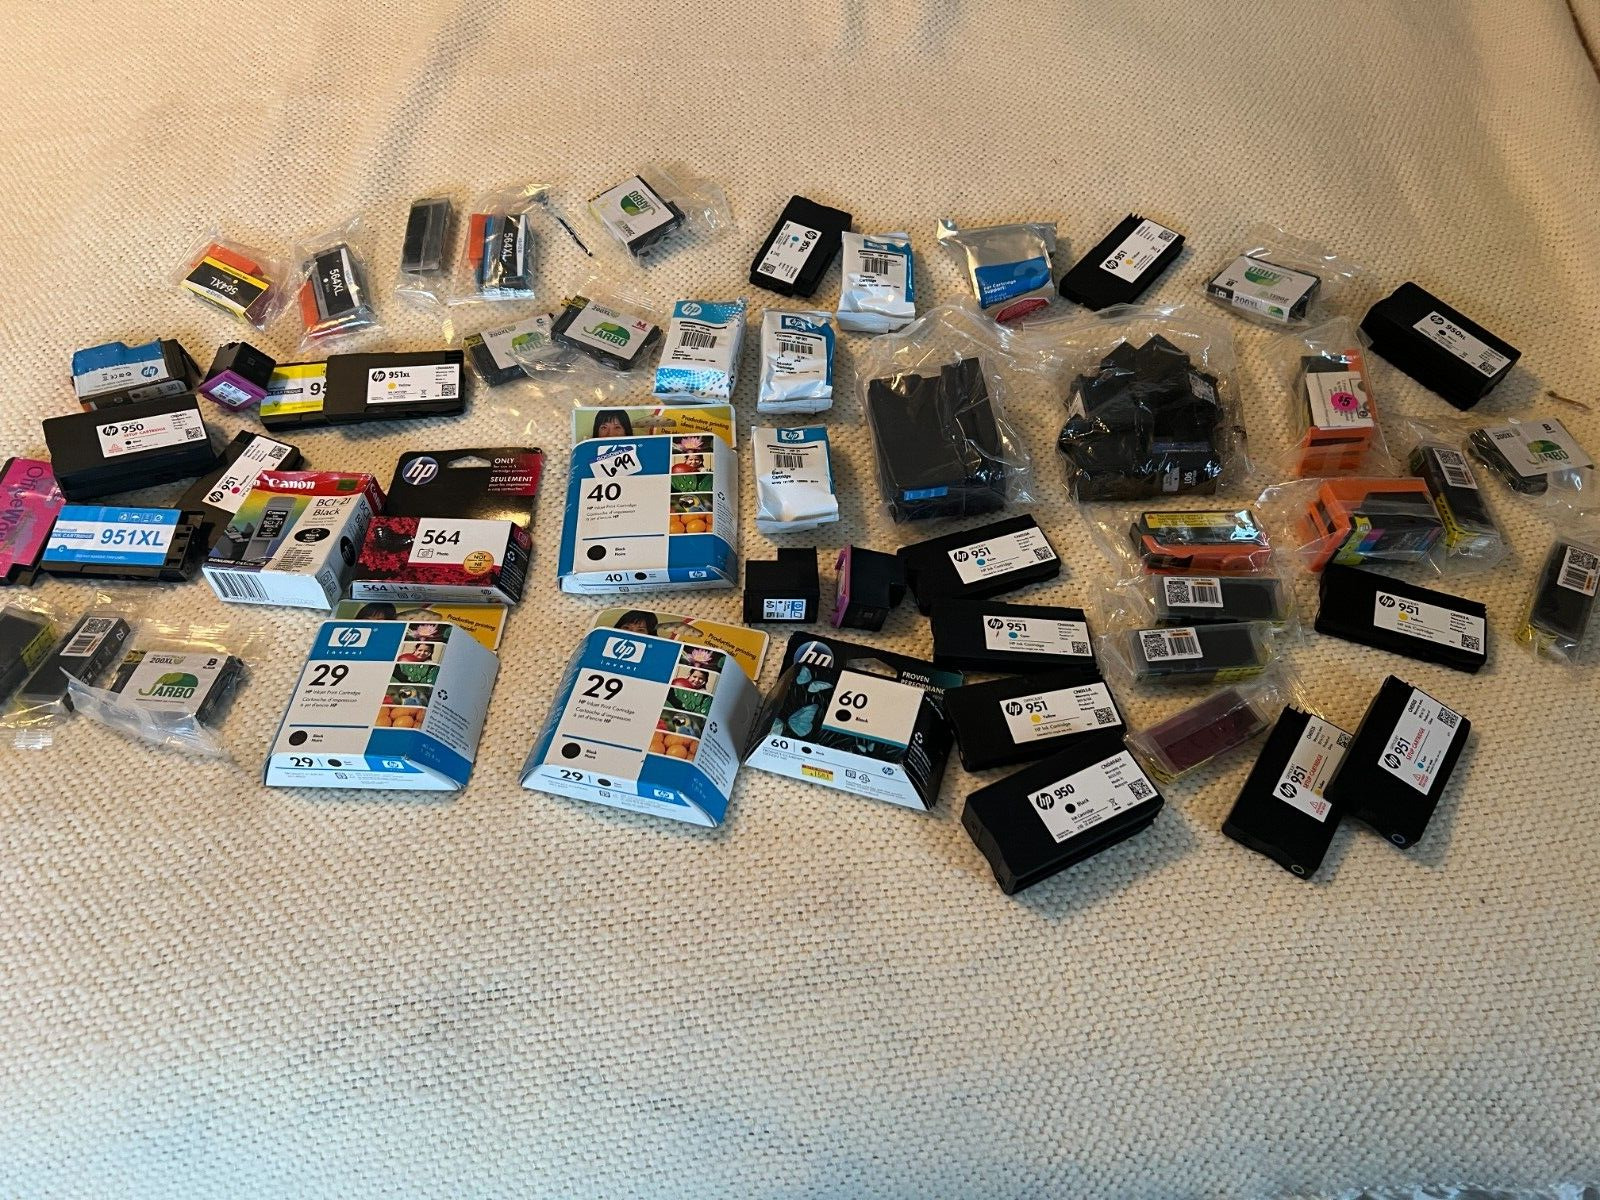 Huge Lot of Over 60 Expired Printer Ink HP, Jarbo, Cannon, etc